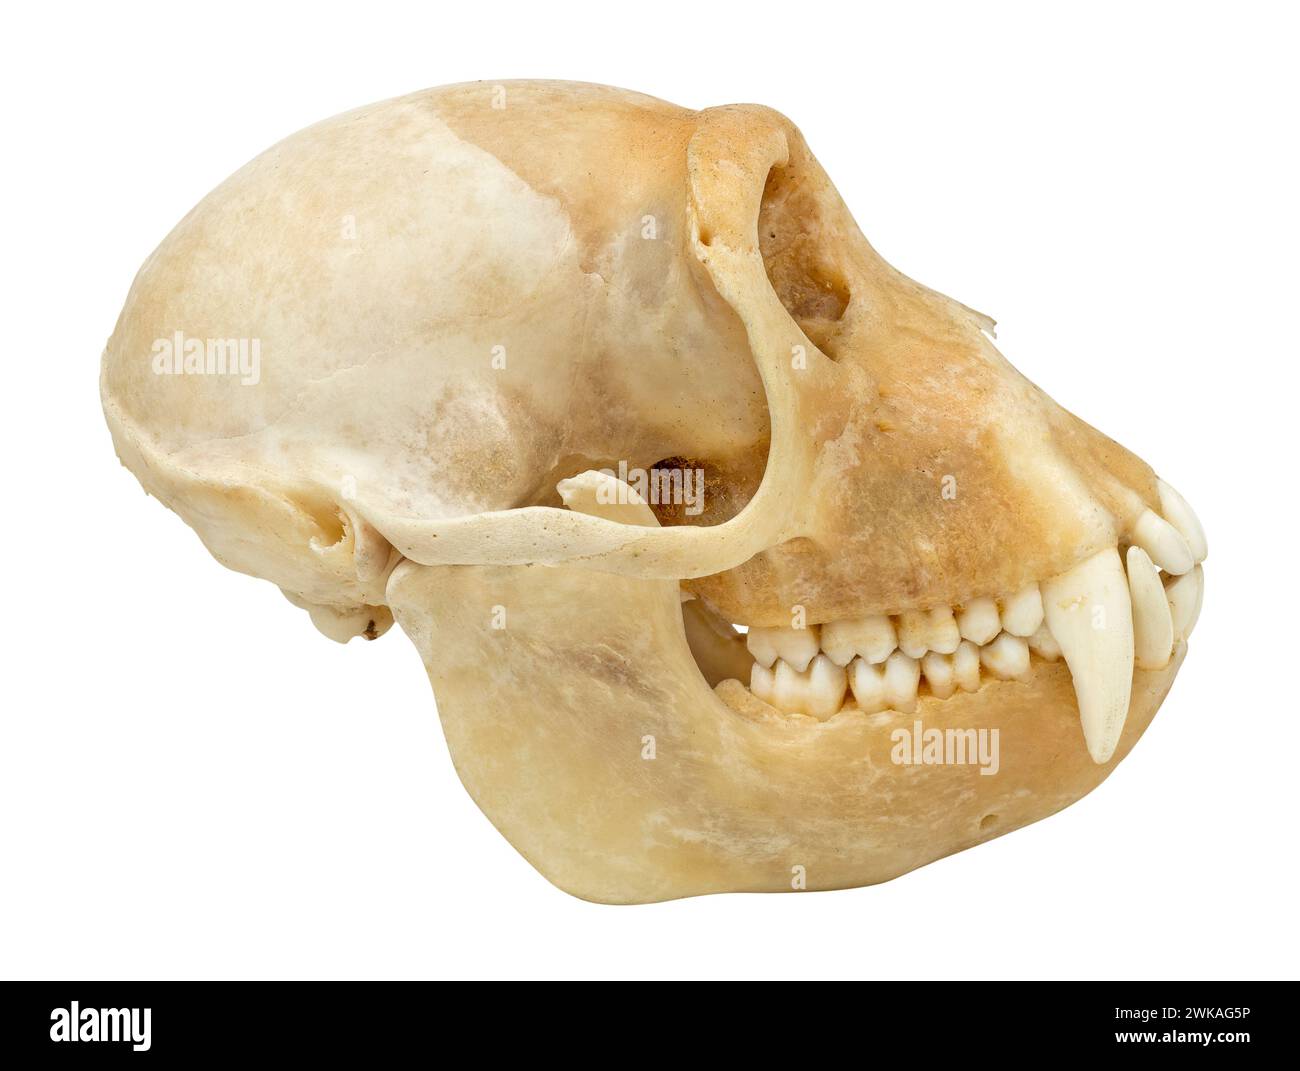 Skull of animal isolated on white, side view Stock Photo